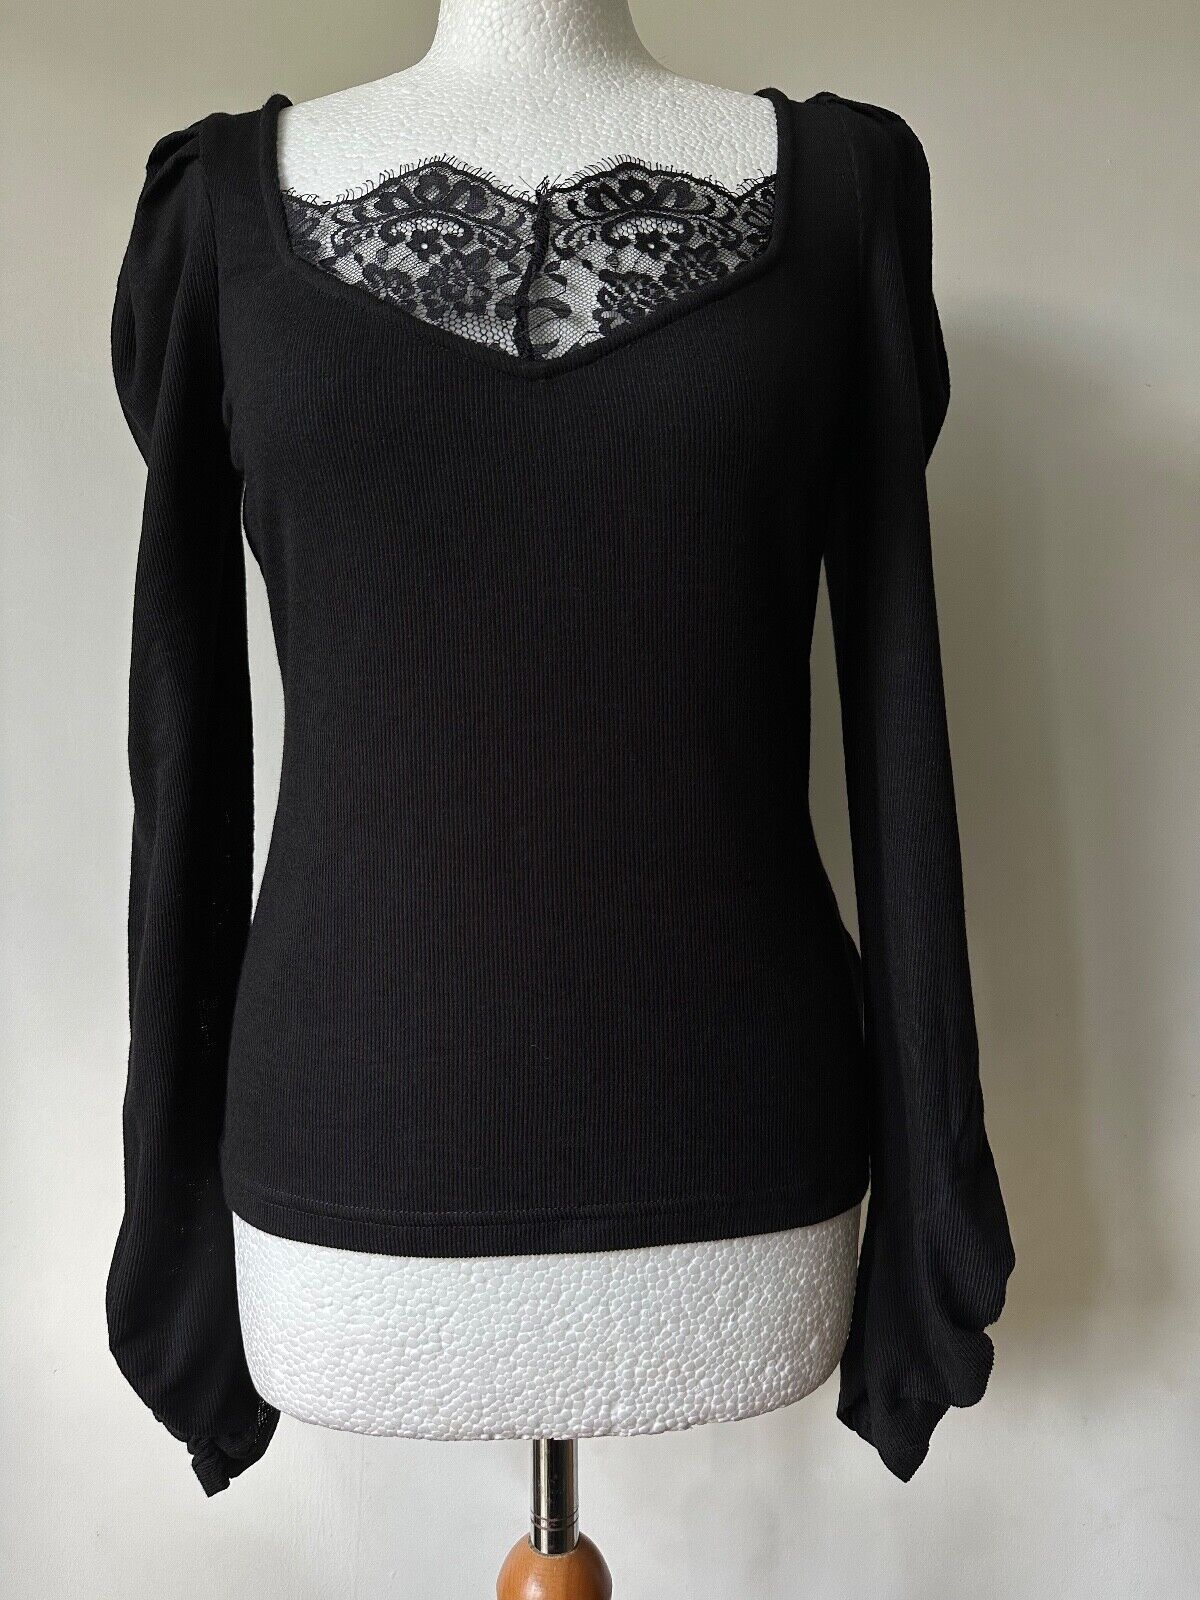 Dorothy Perkins Rib Lace Trim Top 8, 10, 12, 14, 16, 18 Puff Shoulders, Ruched